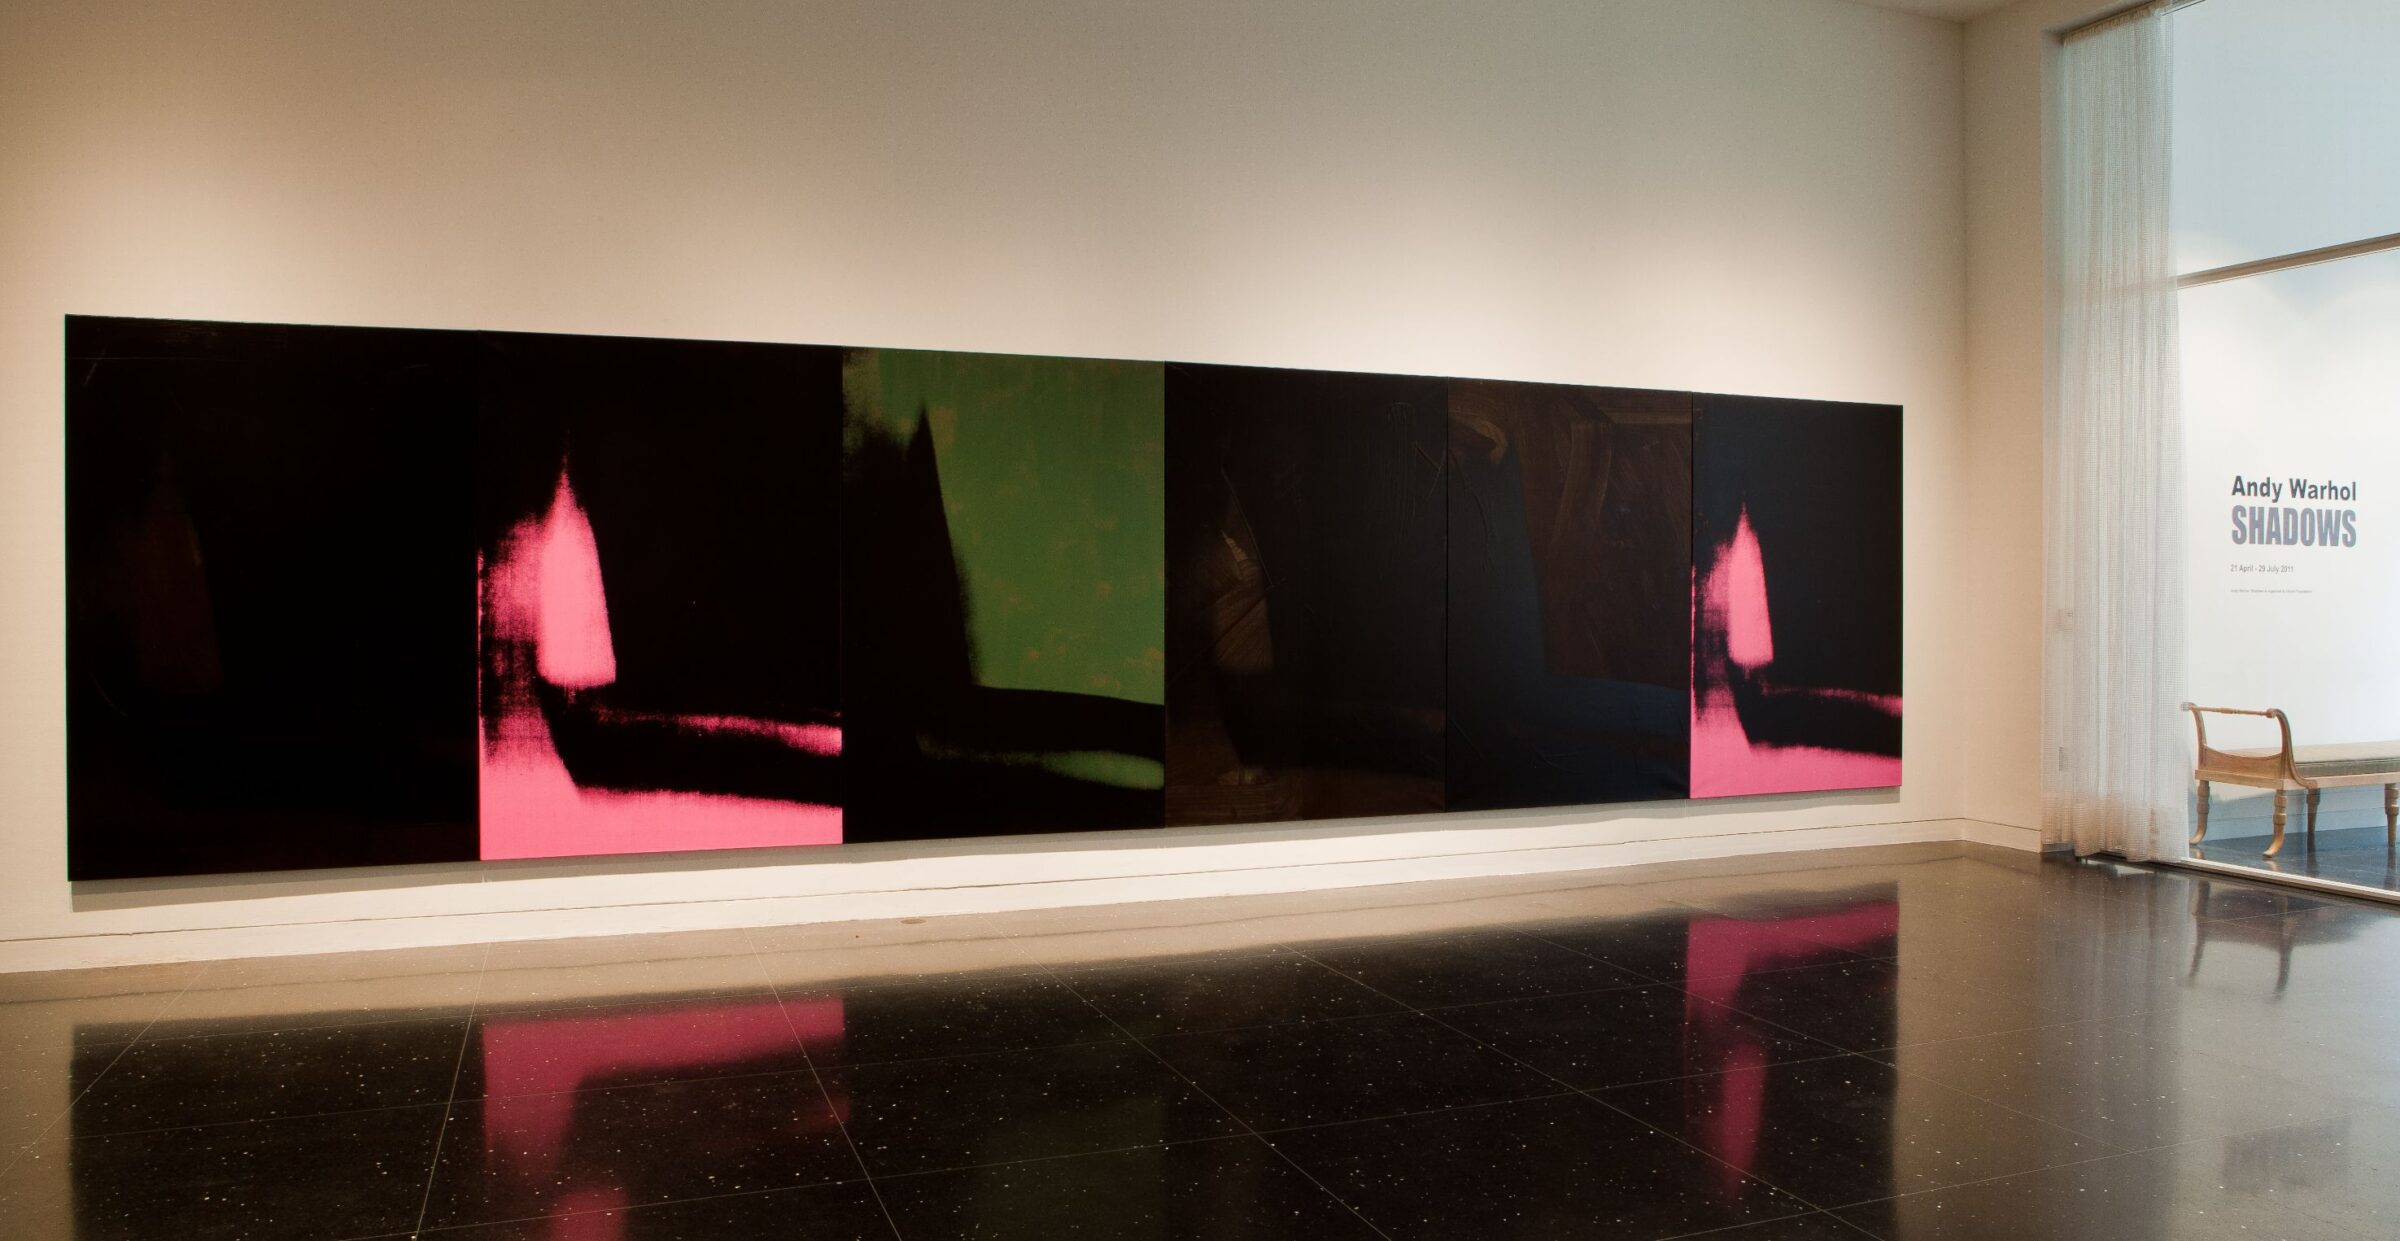 A massive abstract painting of mostly black and a few blotches of army green and pink spans the entire length of a freestanding gallery wall. To the far right, wall text reads "Andy Warhol: Shadows"